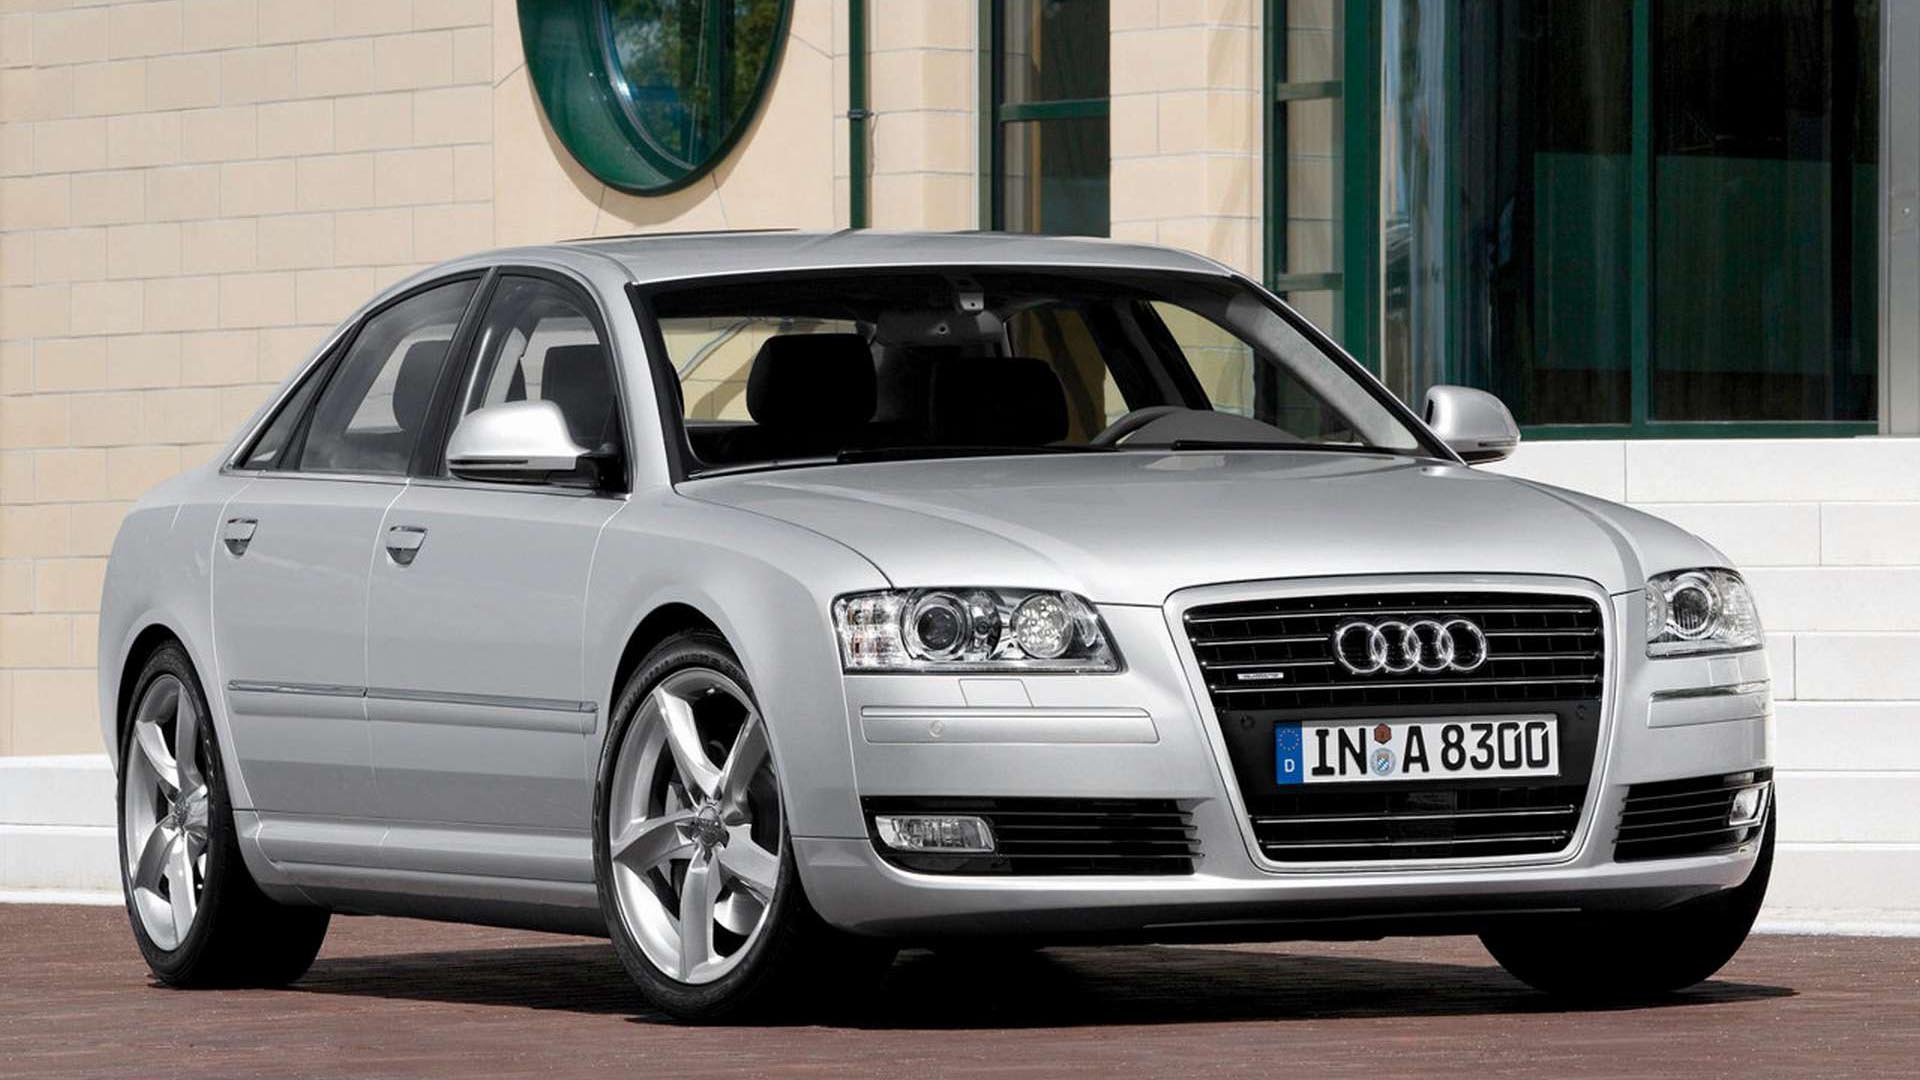 5 Of The Best Used European Luxury Cars To Buy Under $10,000